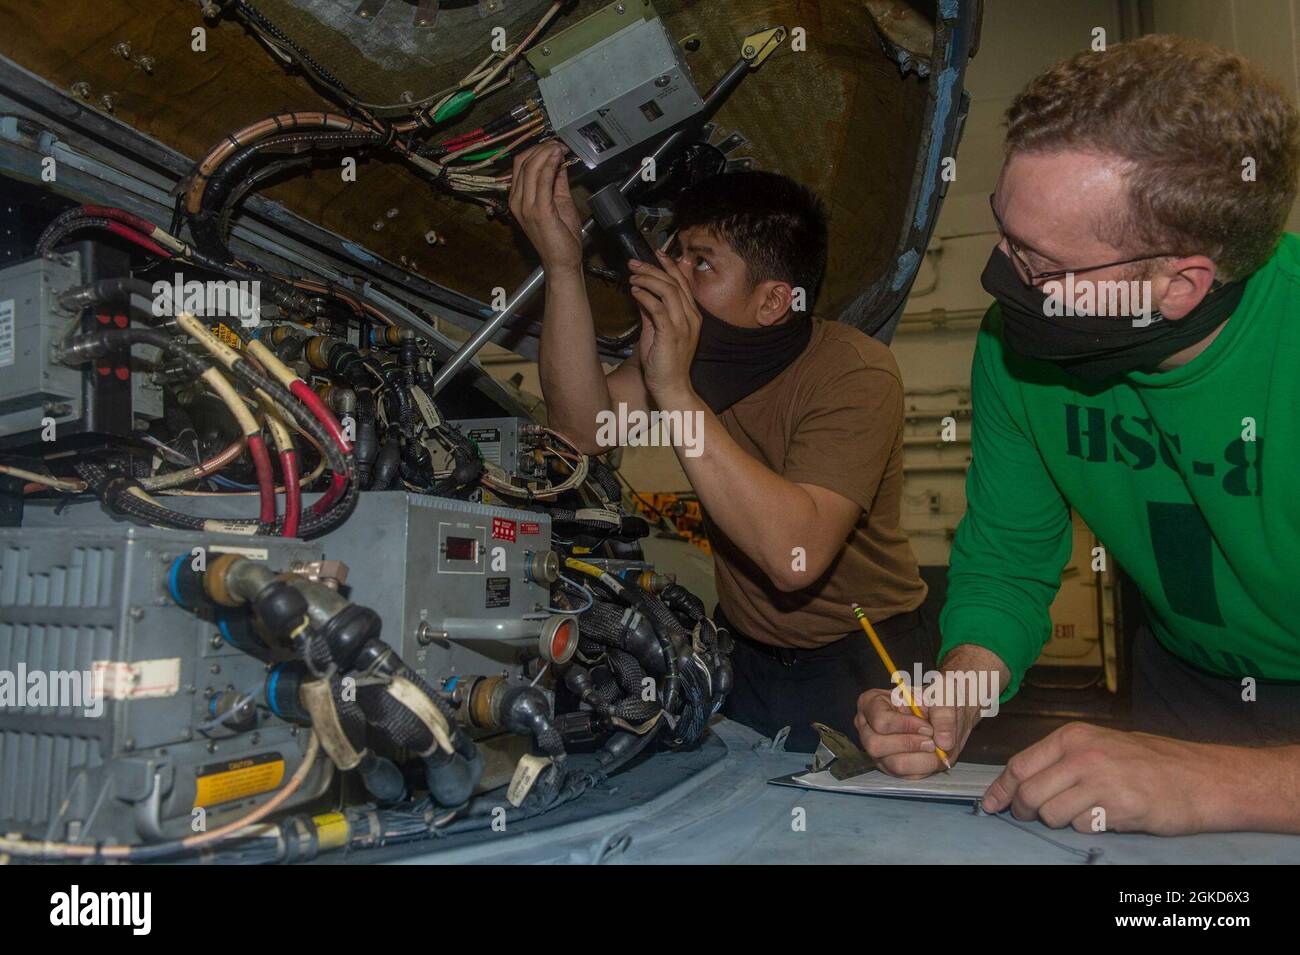 INDIAN OCEAN (March 18, 2021) – U.S. Navy Aviation Electrician’s Mate 1st Class Frederick Navarro, from Cotabato City, Philippines, left, and Aviation Machinist’s Mate 1st Class Bryan Myers, from Matthews, N.C., assigned to the “Eightballers” of Helicopter Sea Combat Squadron (HSC) 8, inspect fuses inside an MH-60S Sea Hawk in the hangar bay of the aircraft carrier USS Theodore Roosevelt (CVN 71) March 18, 2021. The Theodore Roosevelt Carrier Strike Group is on a scheduled deployment to the U.S. 7th Fleet area of operations. As the U.S. Navy’s largest forward-deployed fleet, 7th Fleet routinel Stock Photo